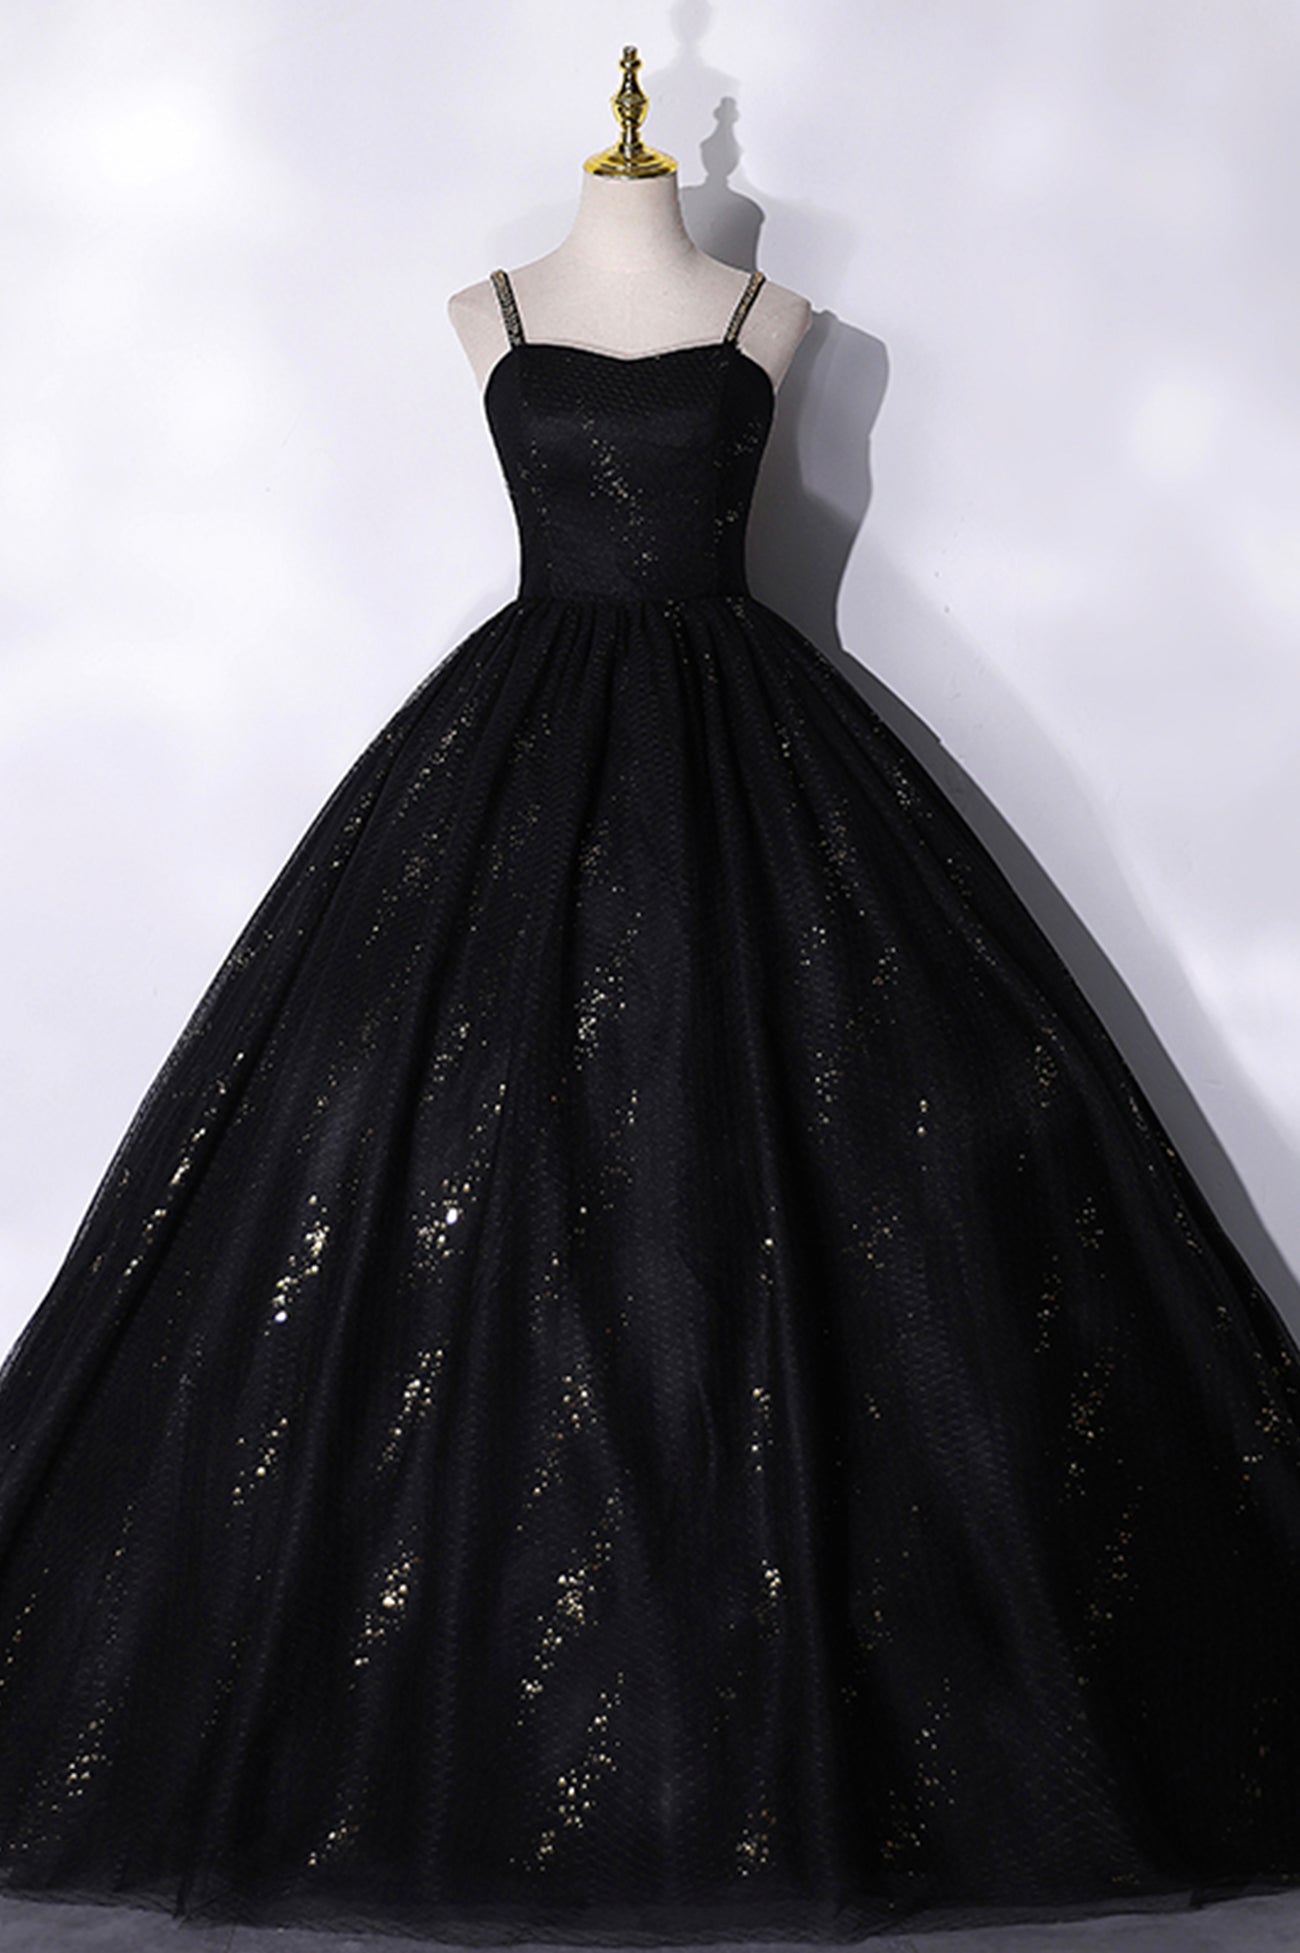 Black Tulle Sequins Long Prom Dress Outfits For Girls, Black Spaghetti Straps Evening Dress